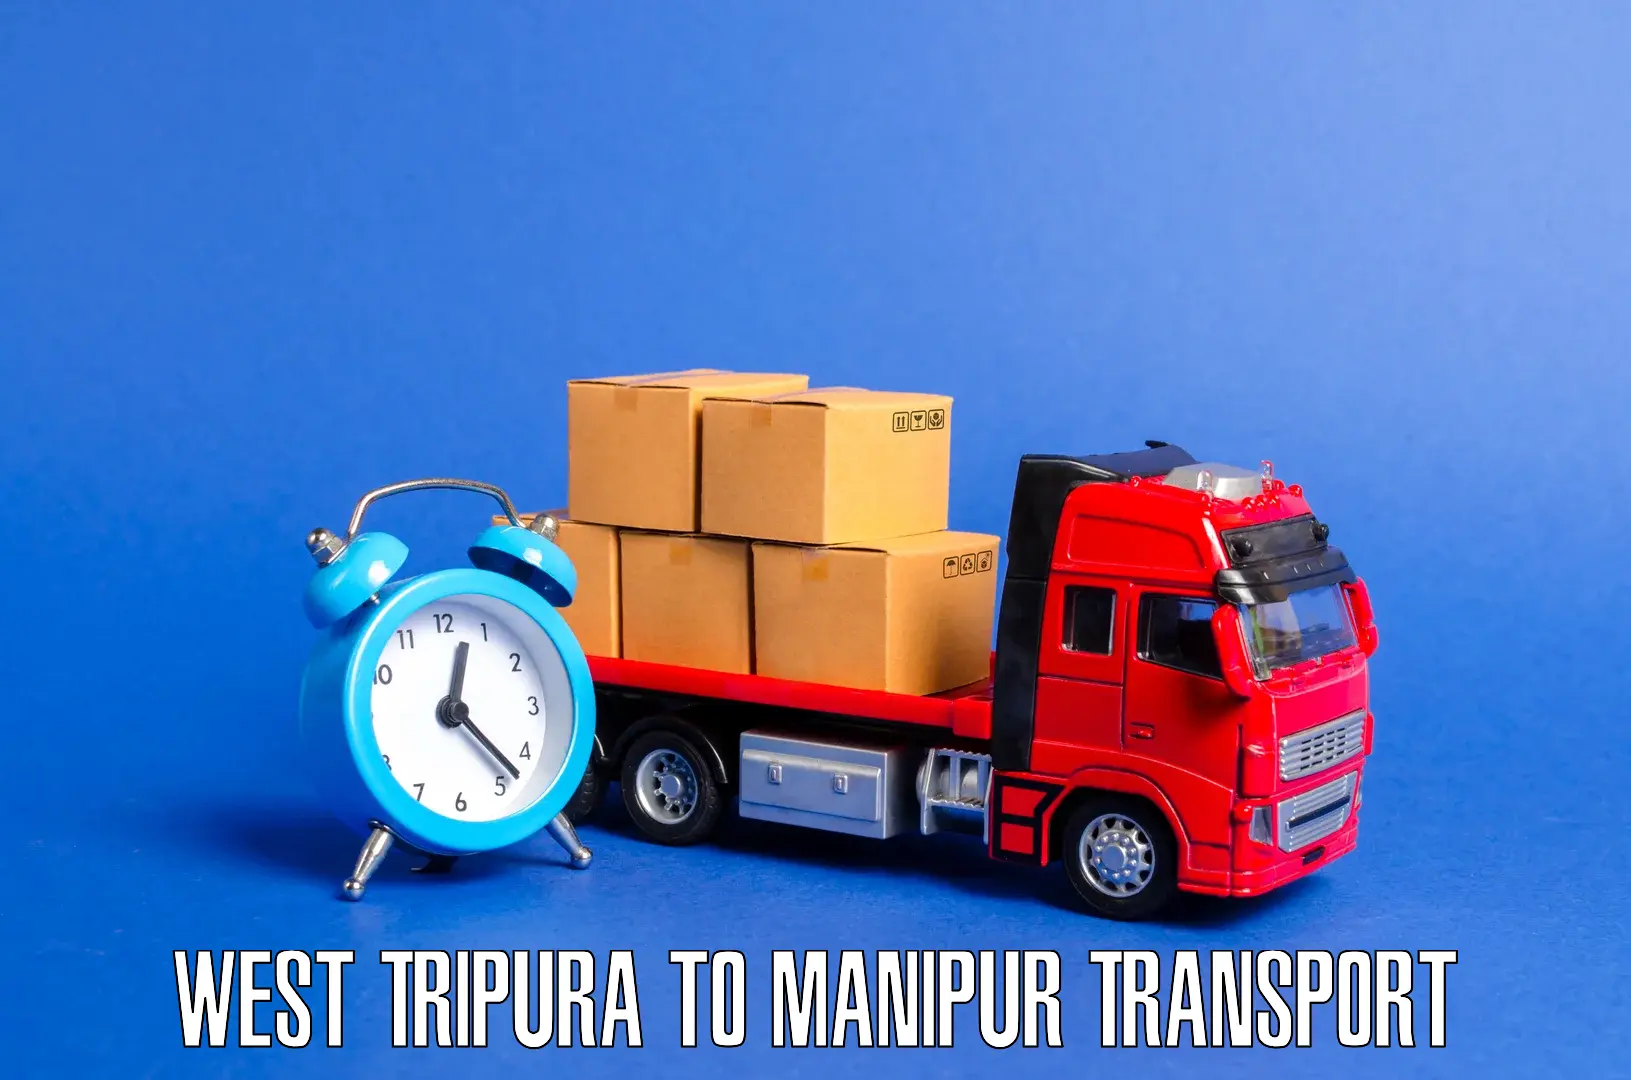 Transport bike from one state to another West Tripura to Churachandpur